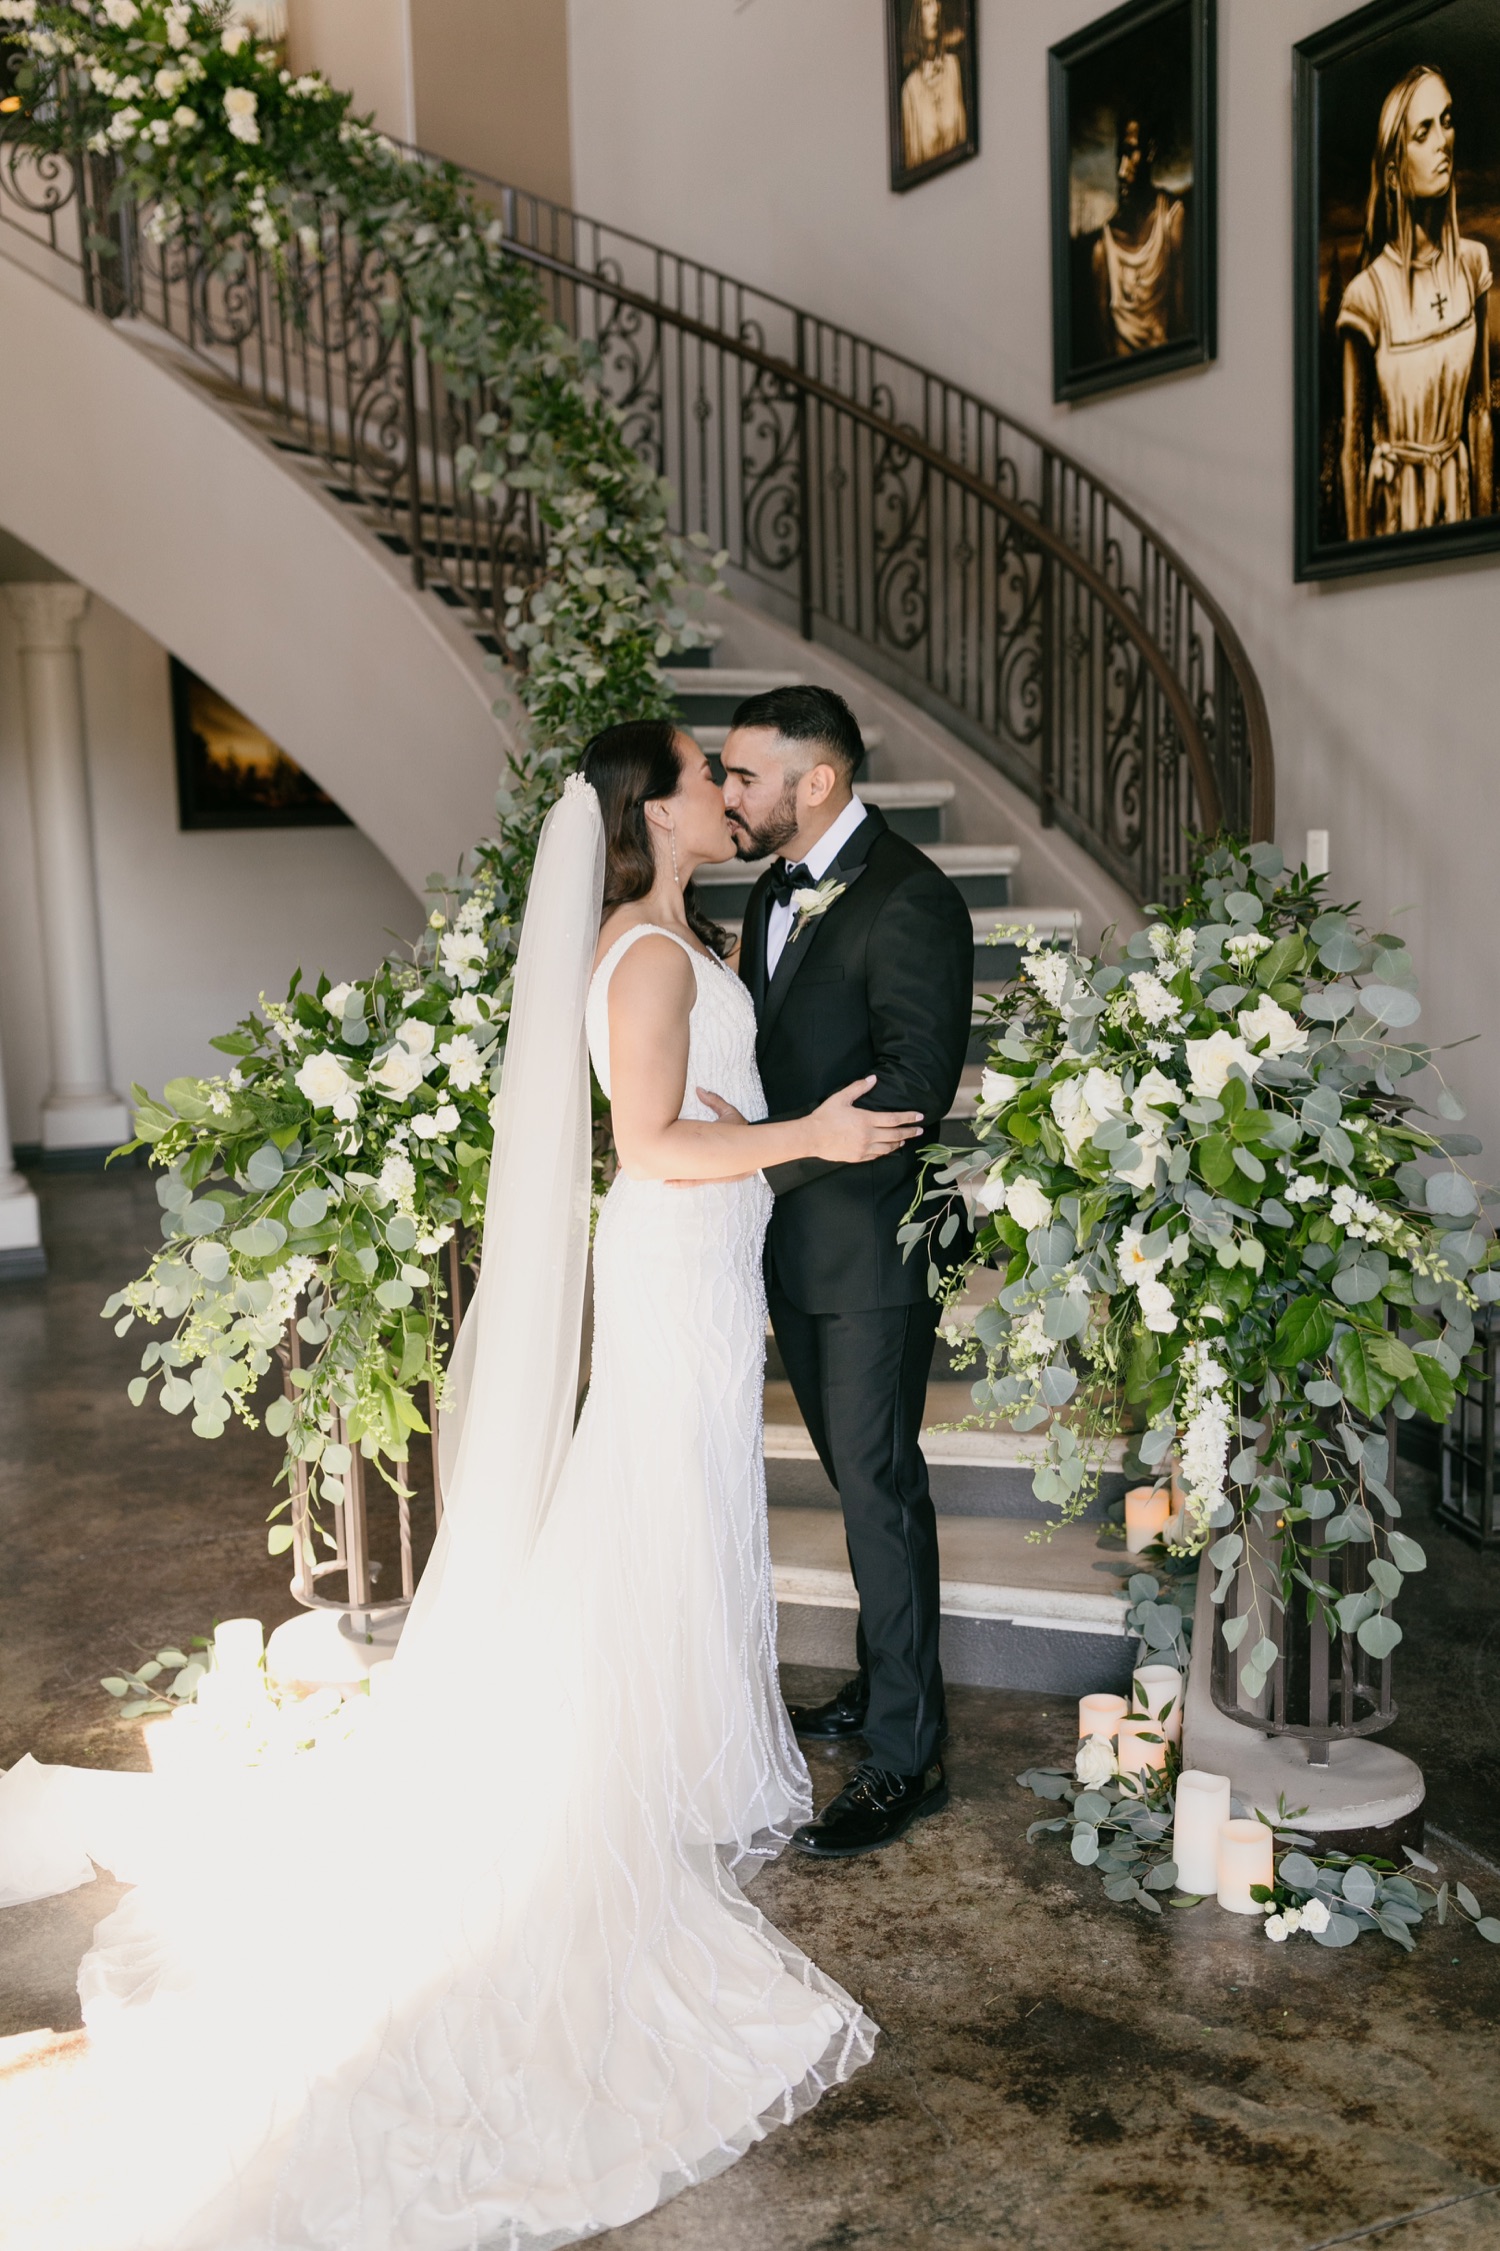 Bride and groom in front of stair case decorated with cascading flowers at Tooth and nail winery